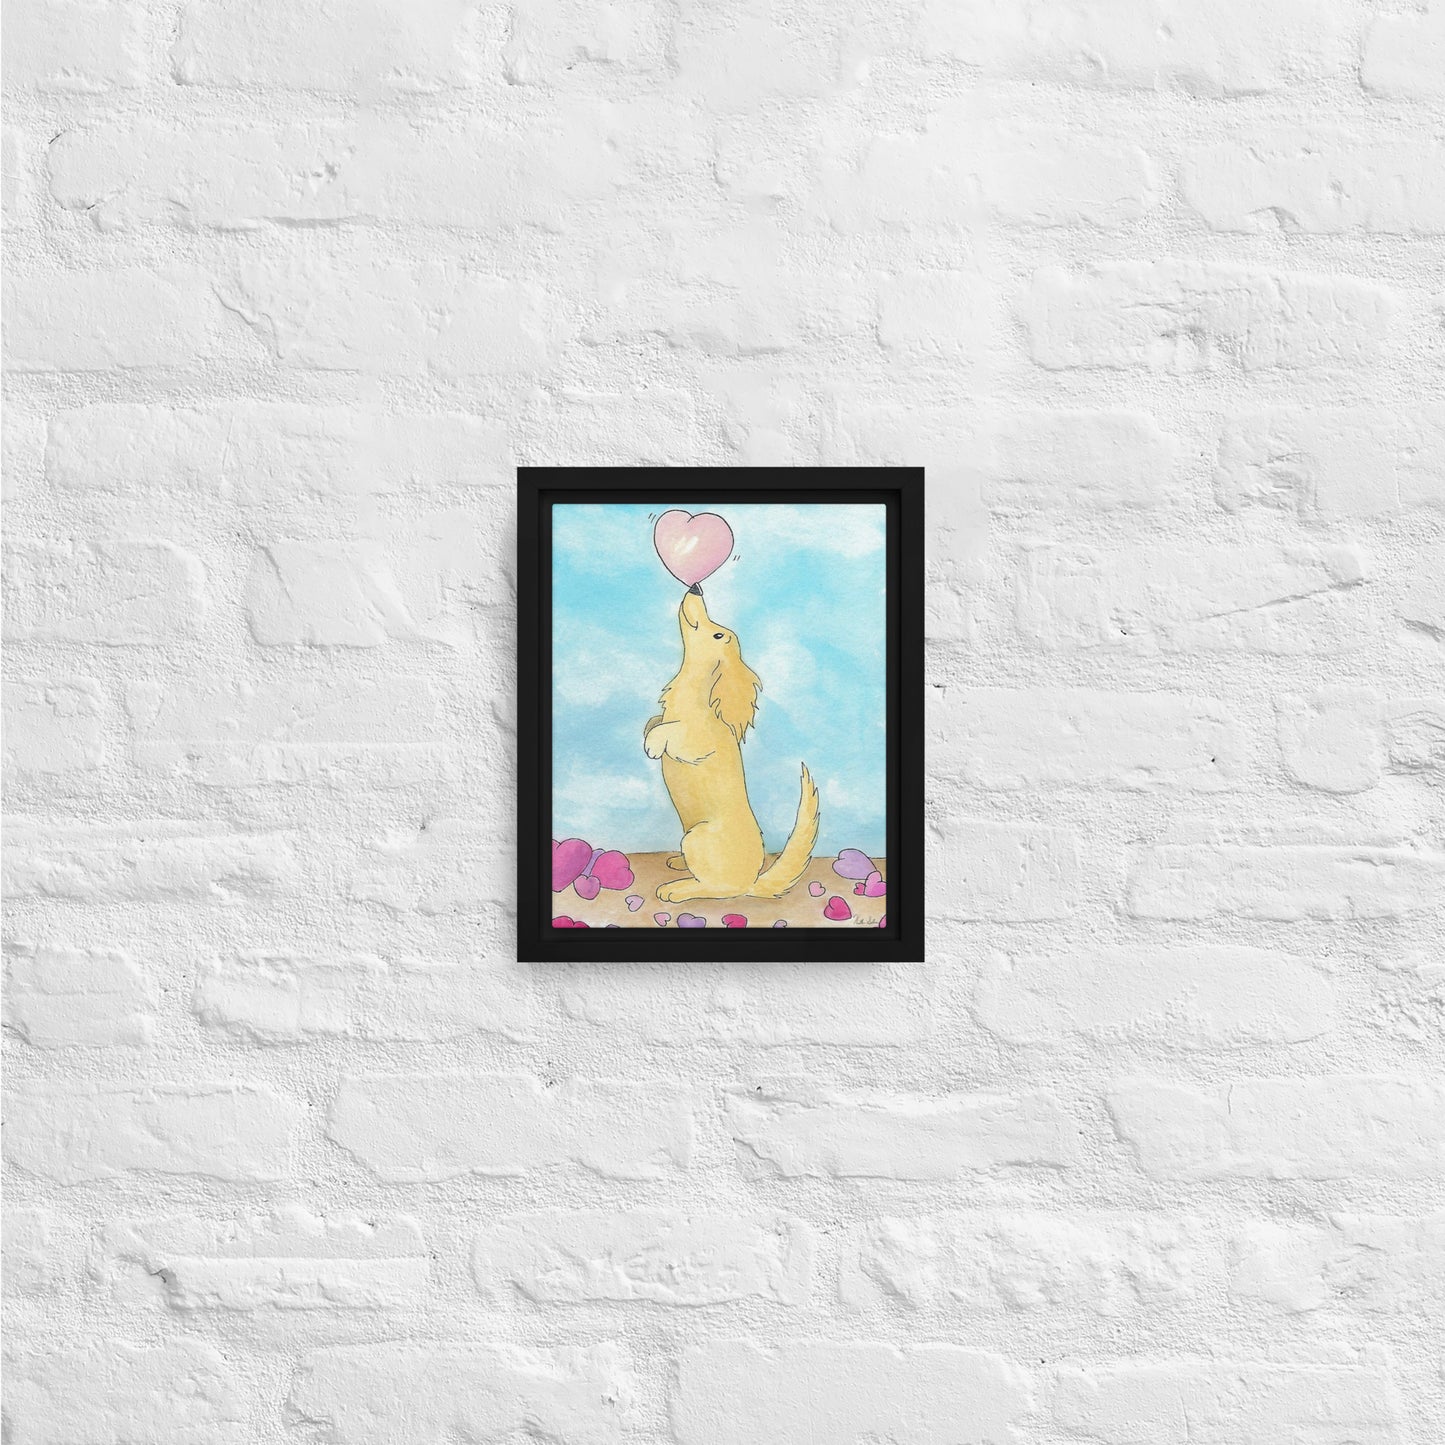 8 by 10 inch framed canvas Puppy Love print. The canvas is in a black pine wood frame. Shown on white brick wall.